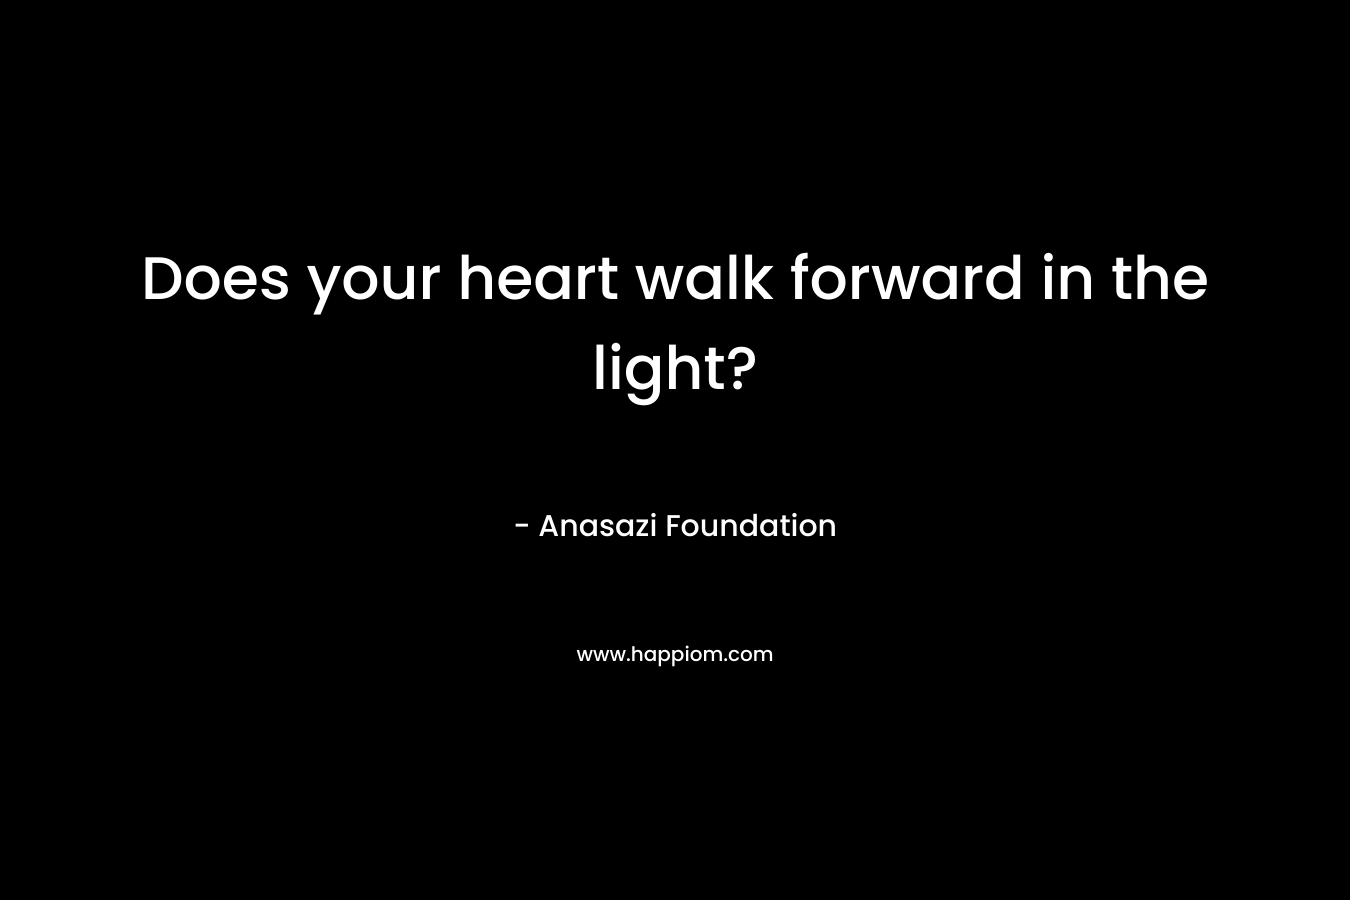 Does your heart walk forward in the light?